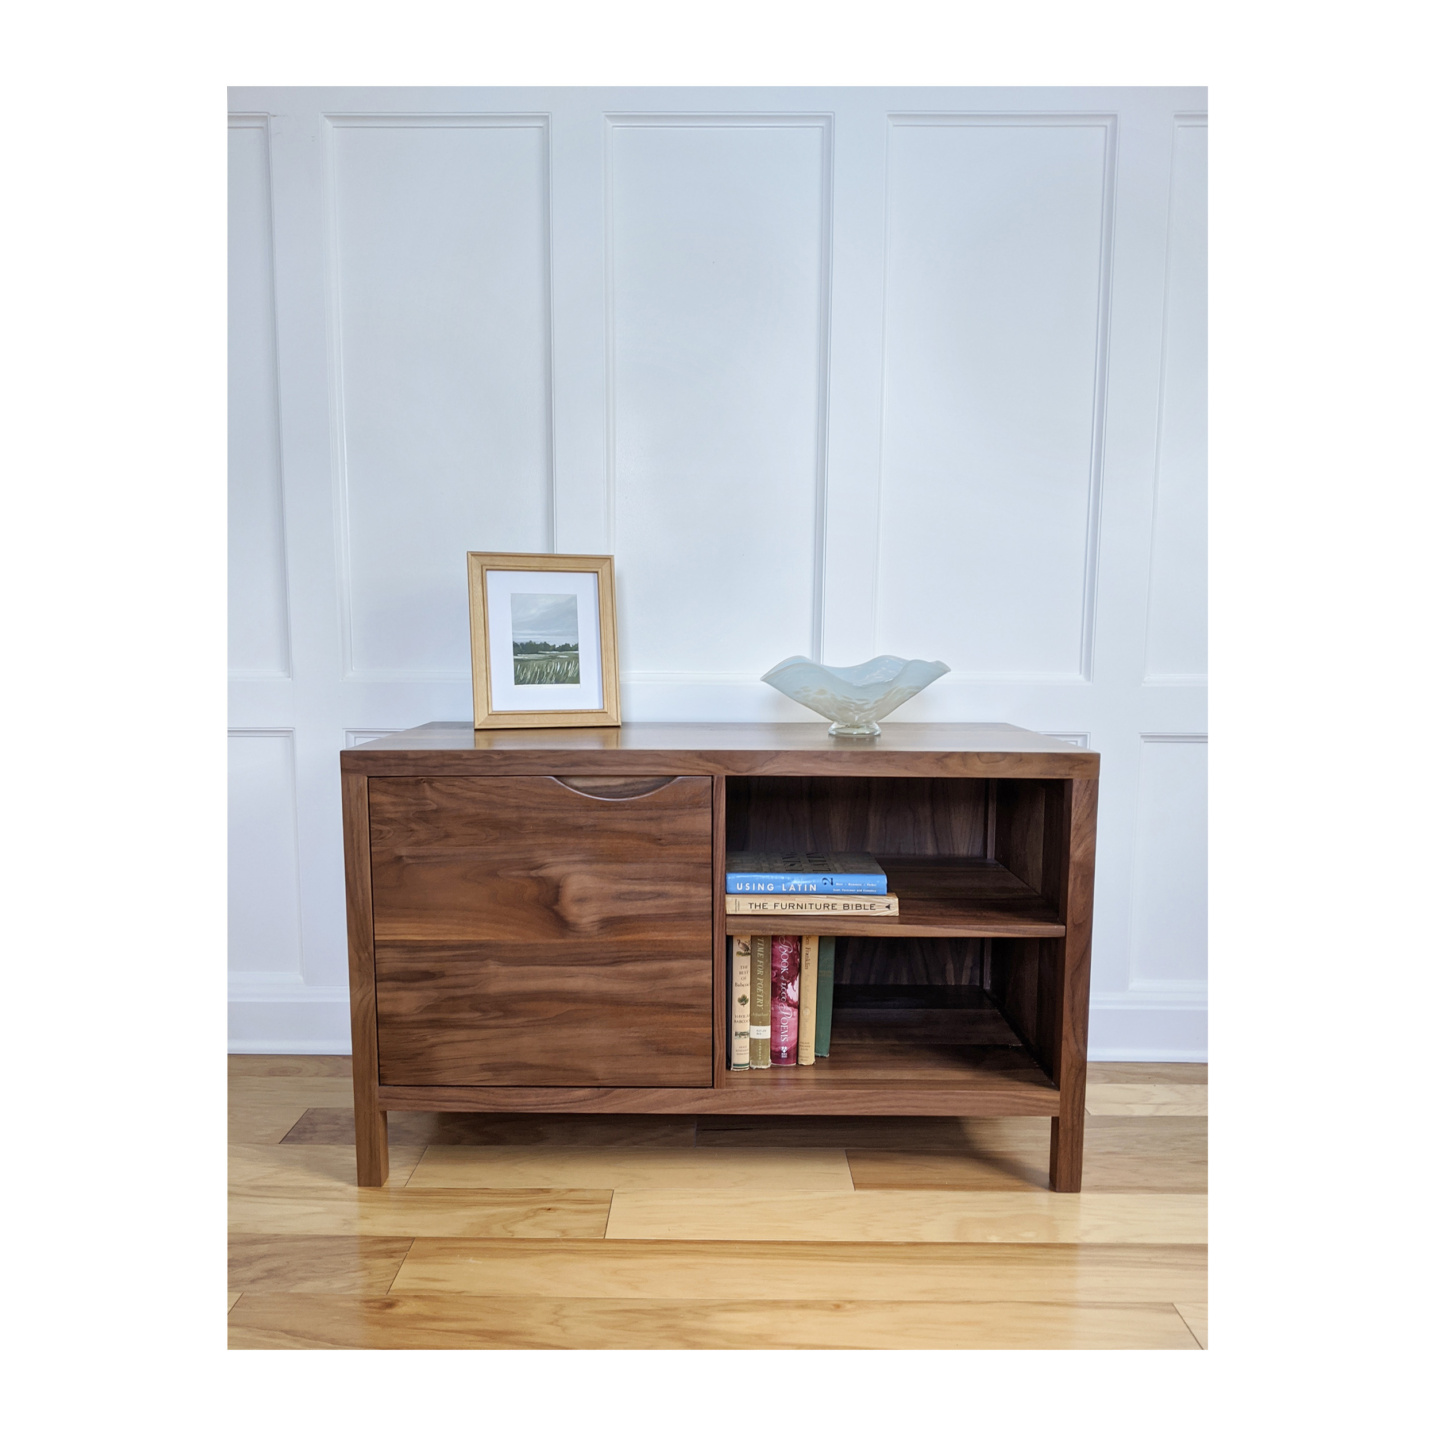 Solid Walnut Modern Small Media Cabinet 42 inches--Made by 57NorthPlank Tailored Modern Furniture